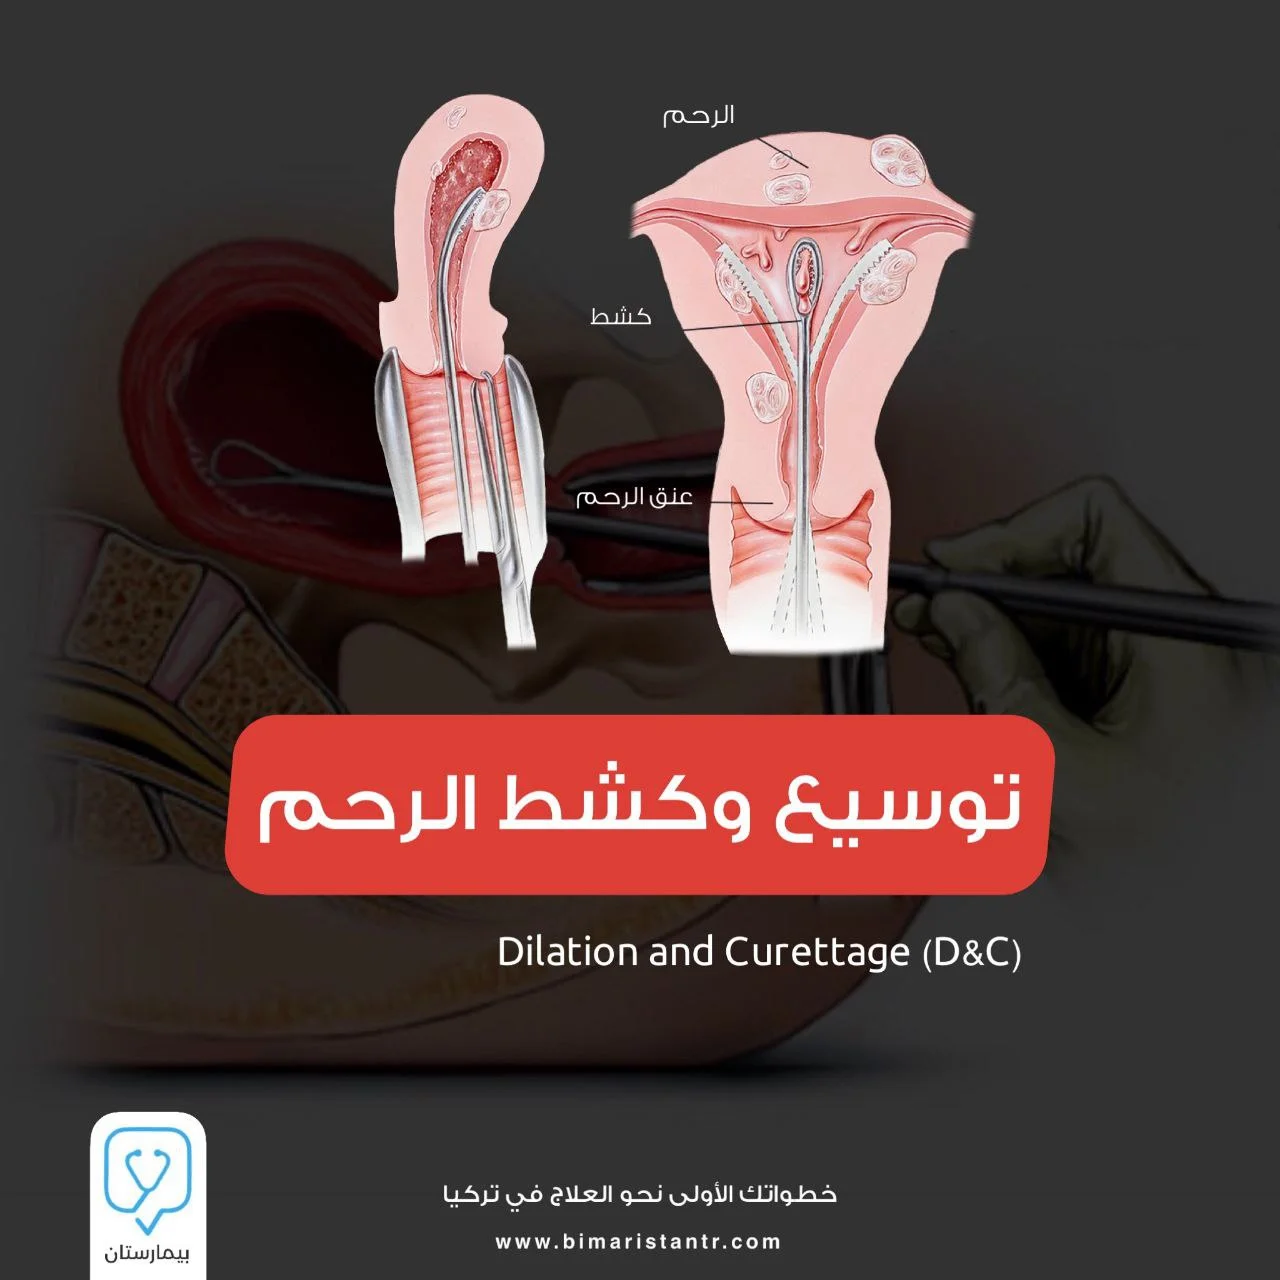 Dilatation and curettage of the uterus